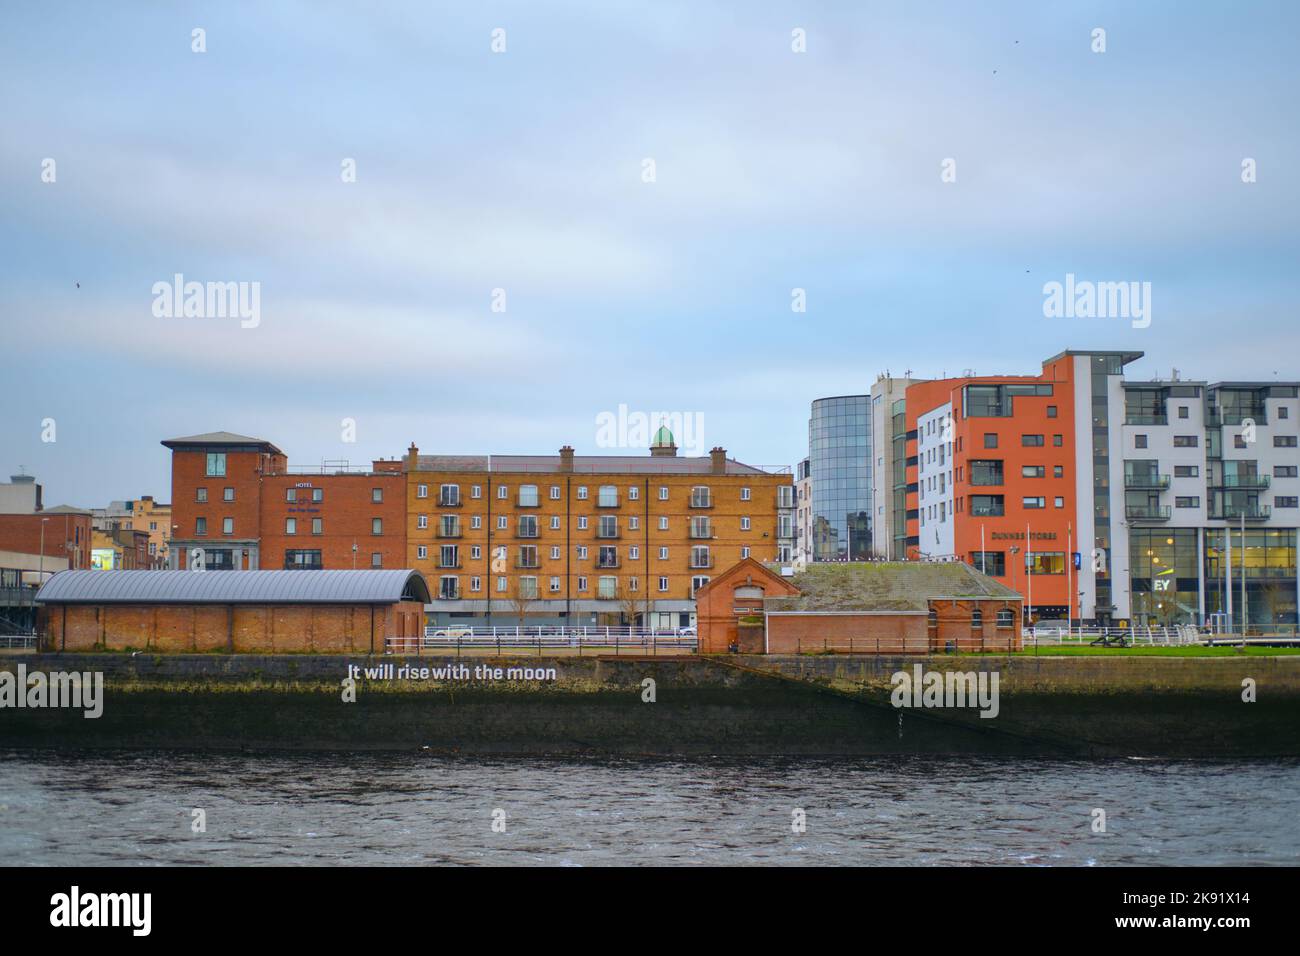 The exterior design of Limerick City buildings along the Shannon river in Ireland Stock Photo